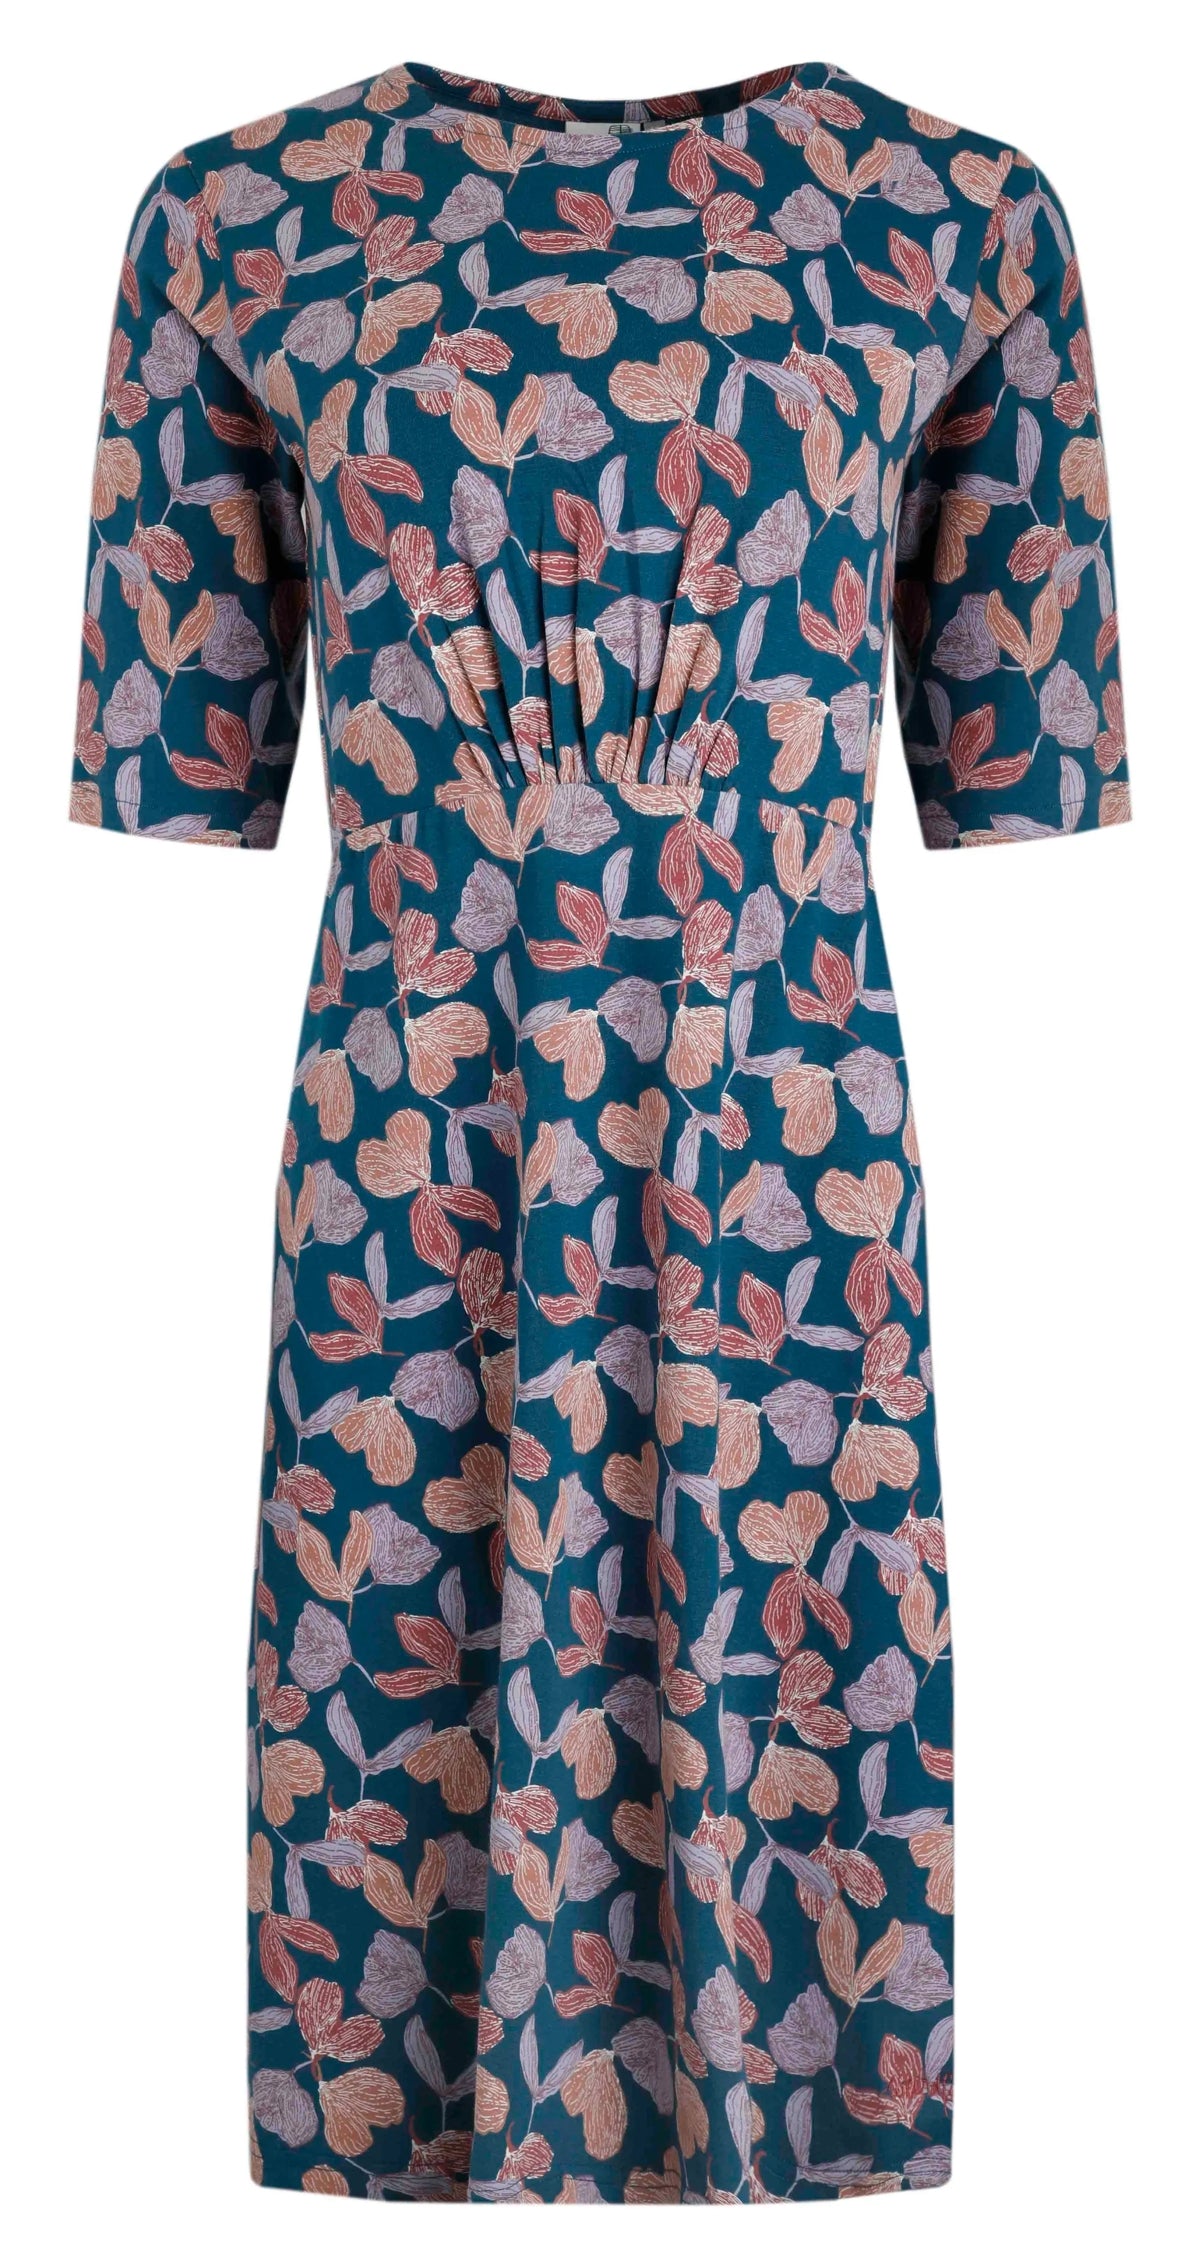 Women's Cassandra swing jersey dress from Weird Fish in Deep Sea Blue with a floral pattern, half length sleeves and gathered fabric at the empire line.